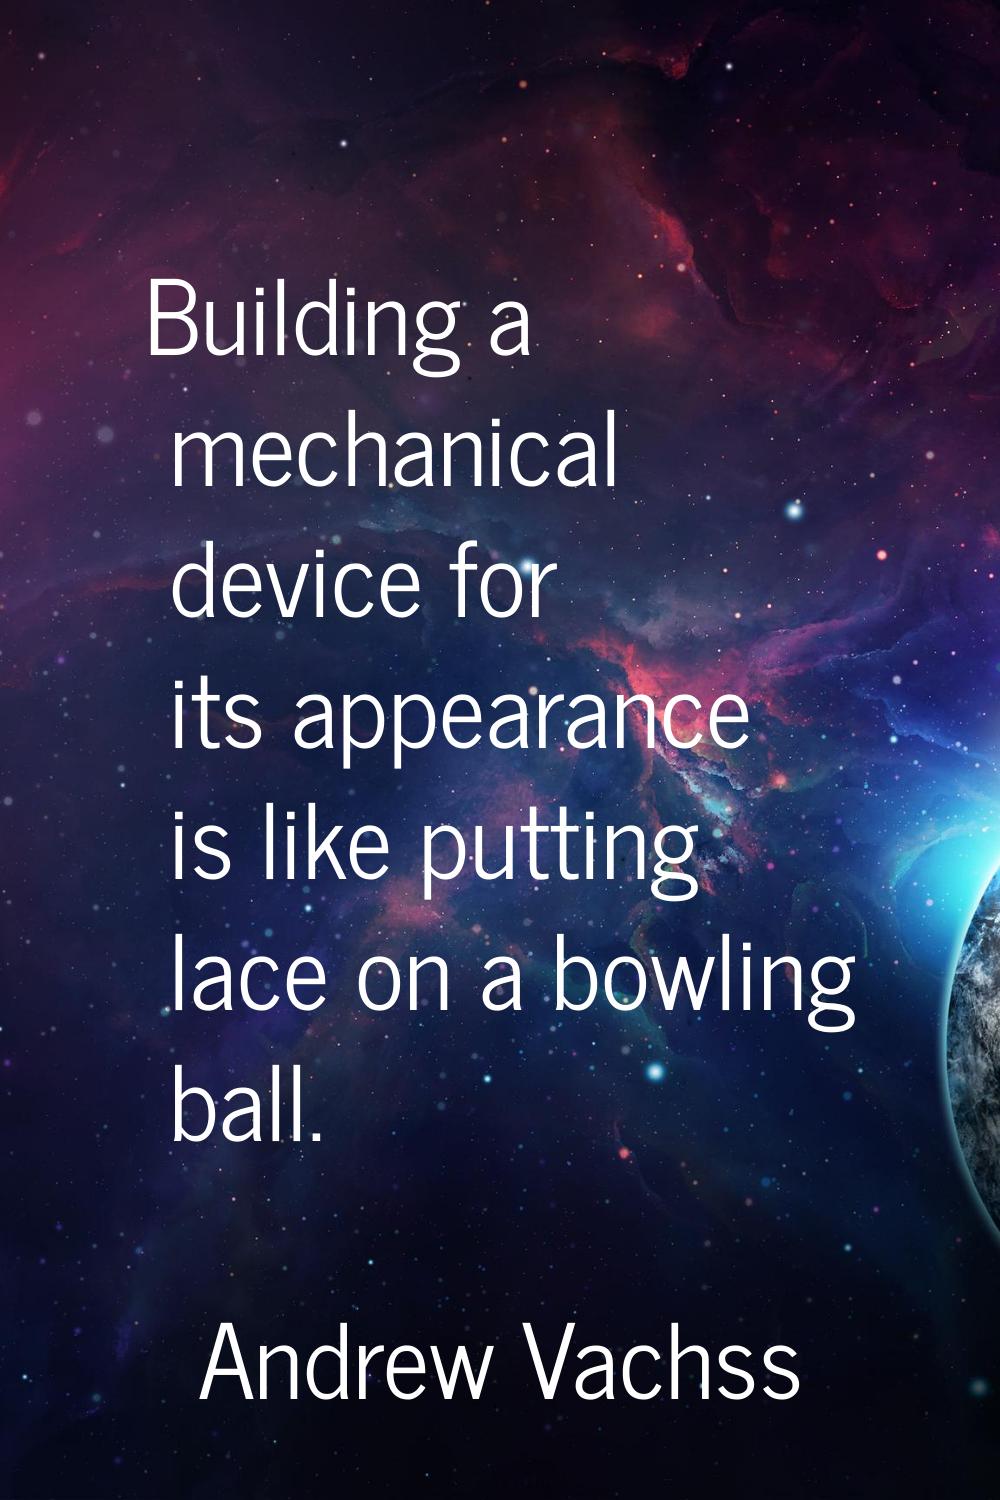 Building a mechanical device for its appearance is like putting lace on a bowling ball.